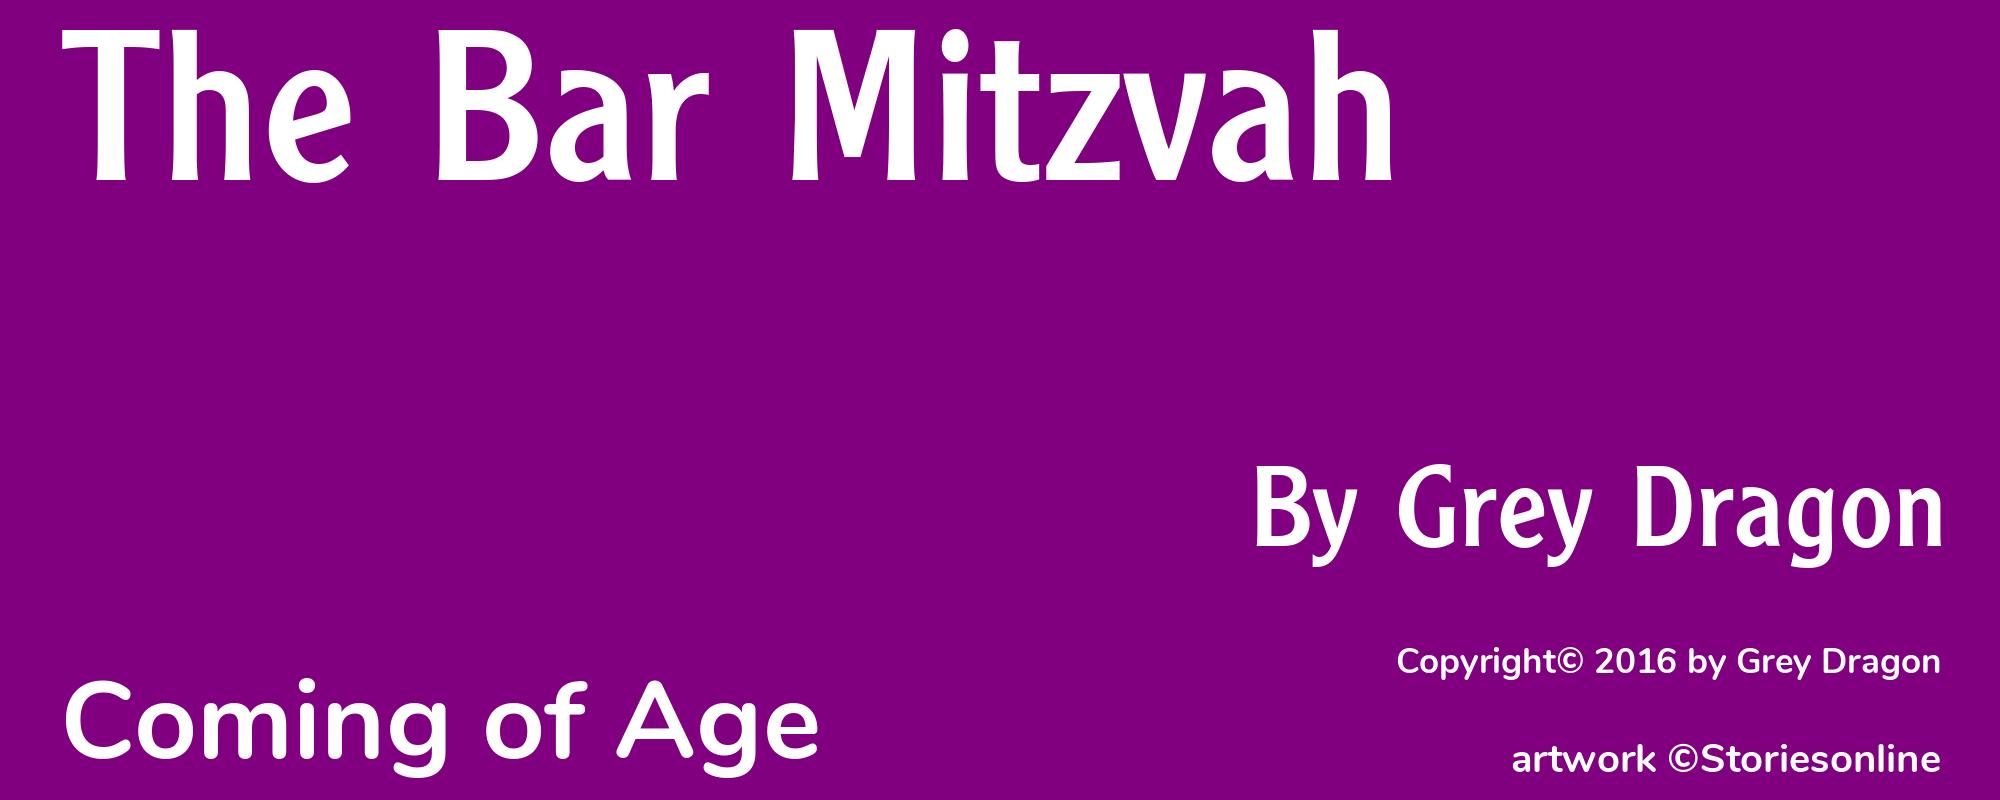 The Bar Mitzvah - Cover